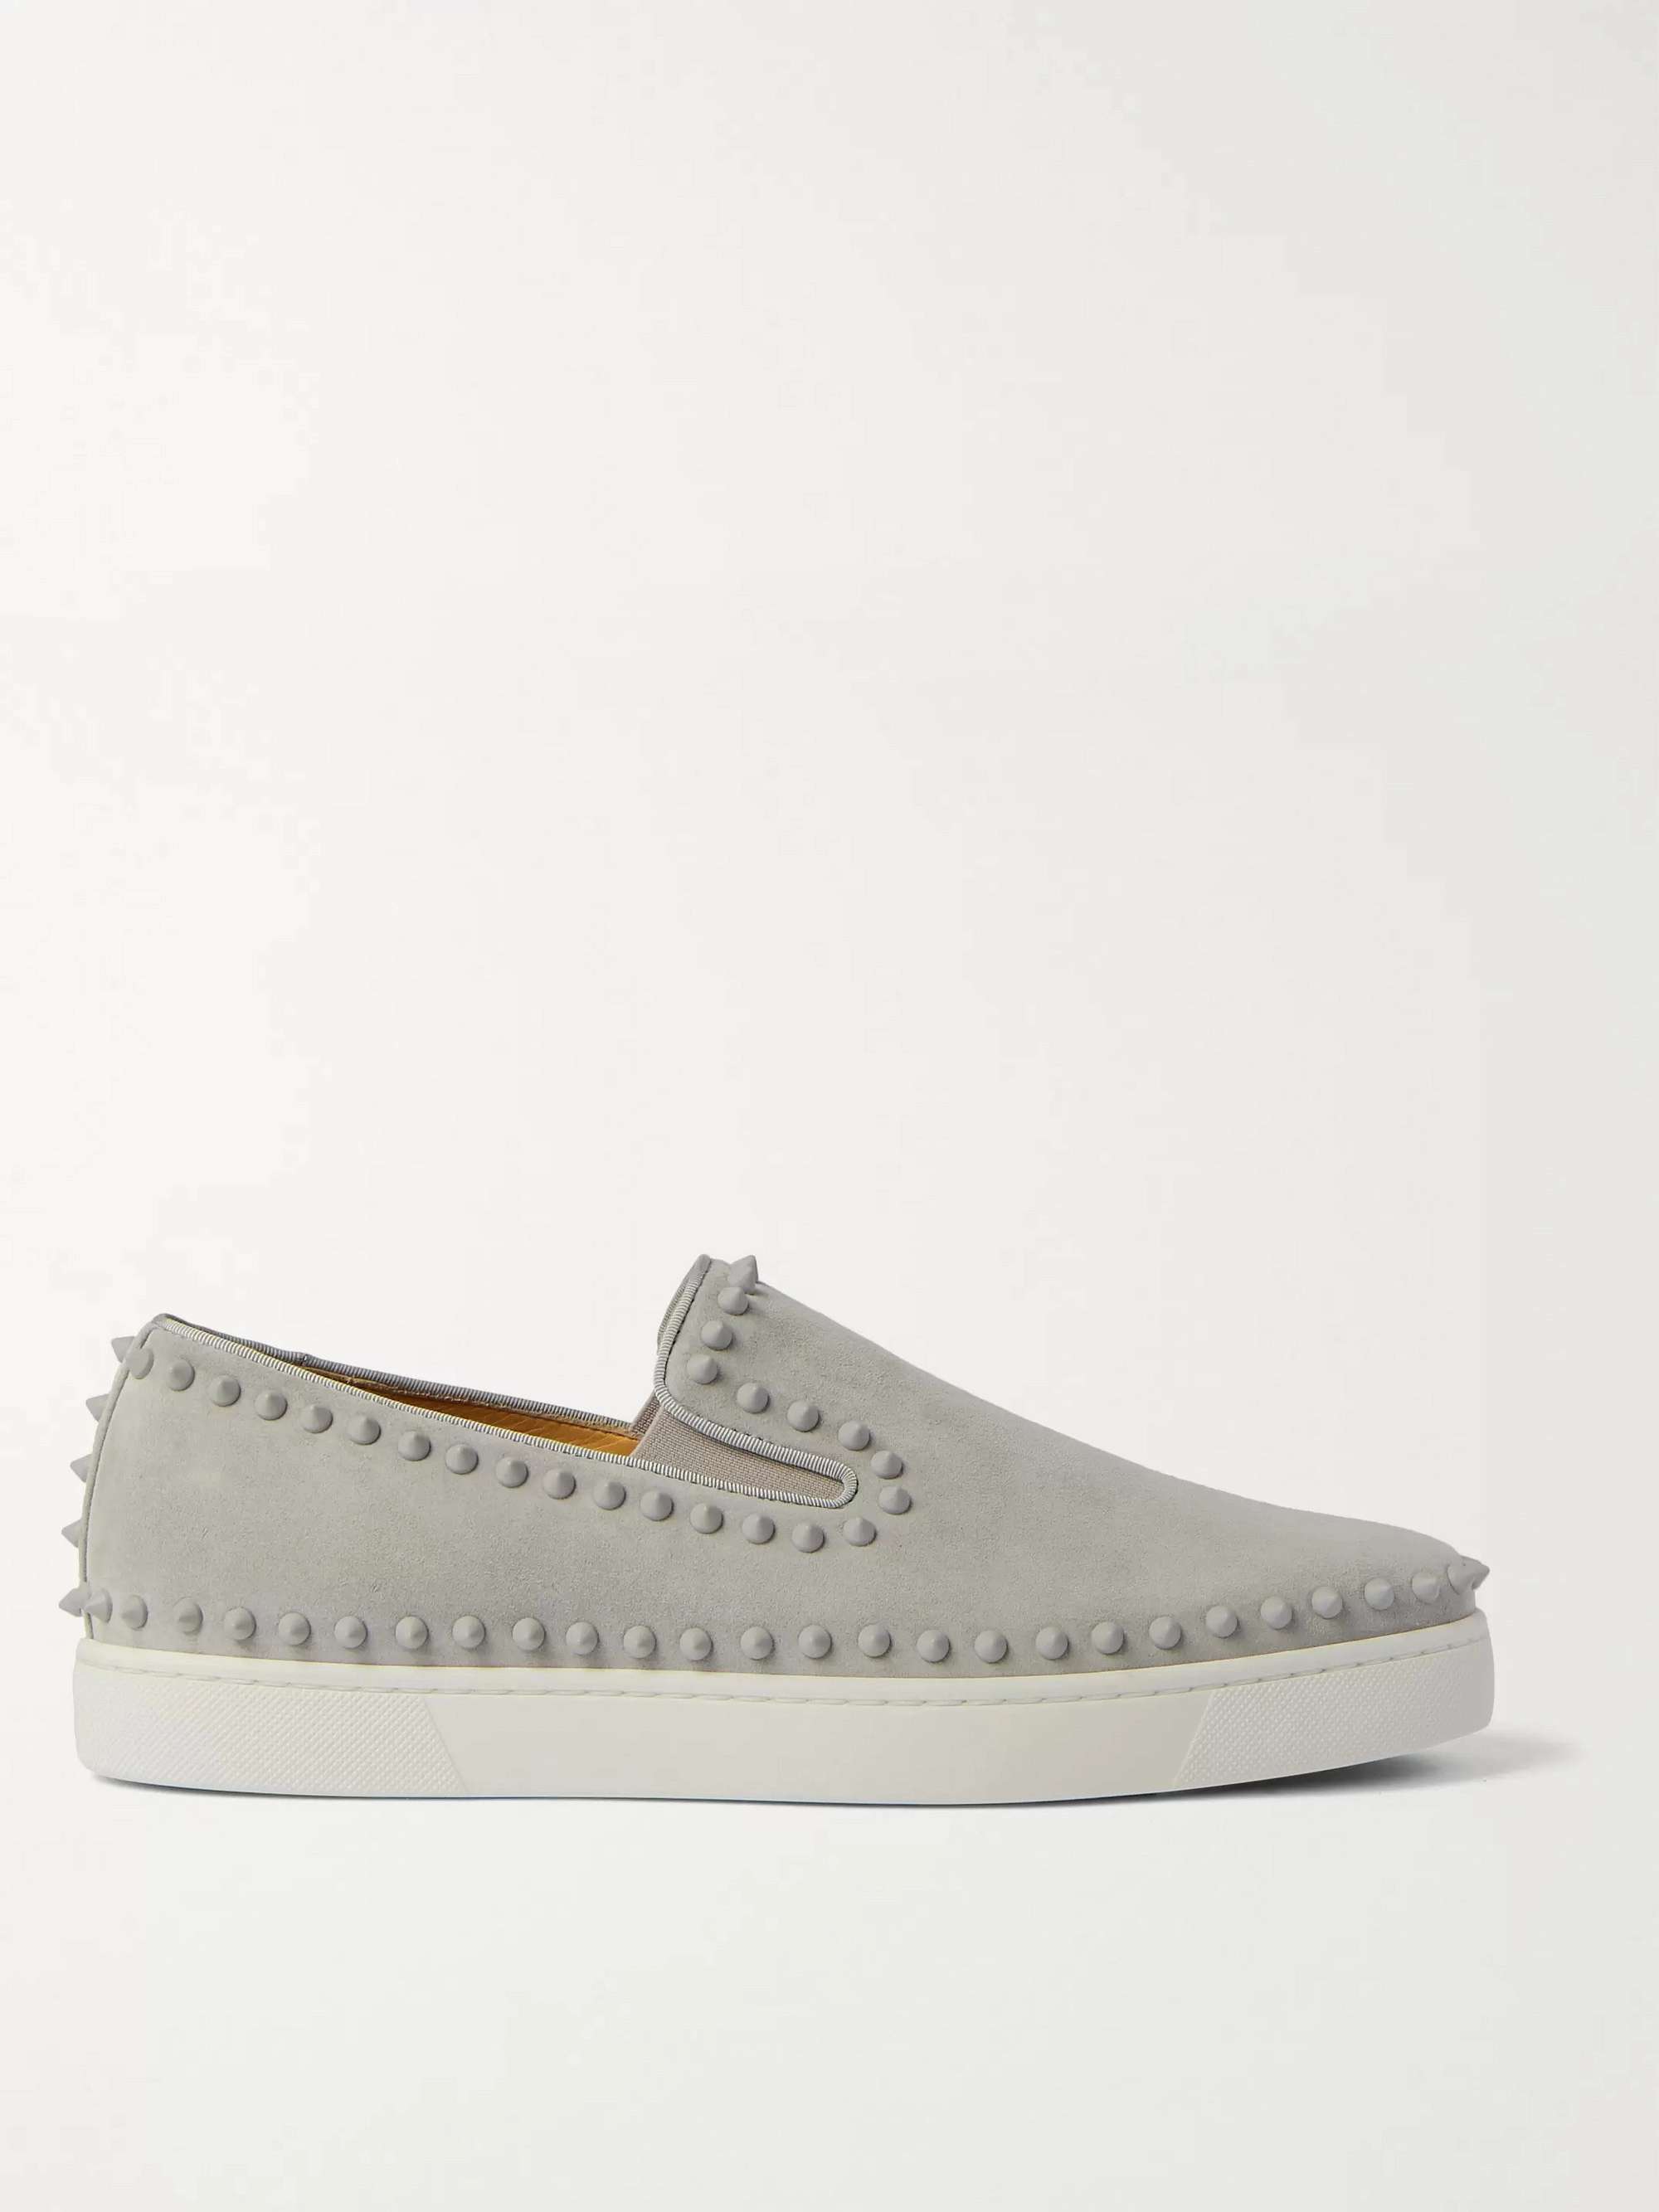 Pik Boat Studded Suede Slip-On Sneakers